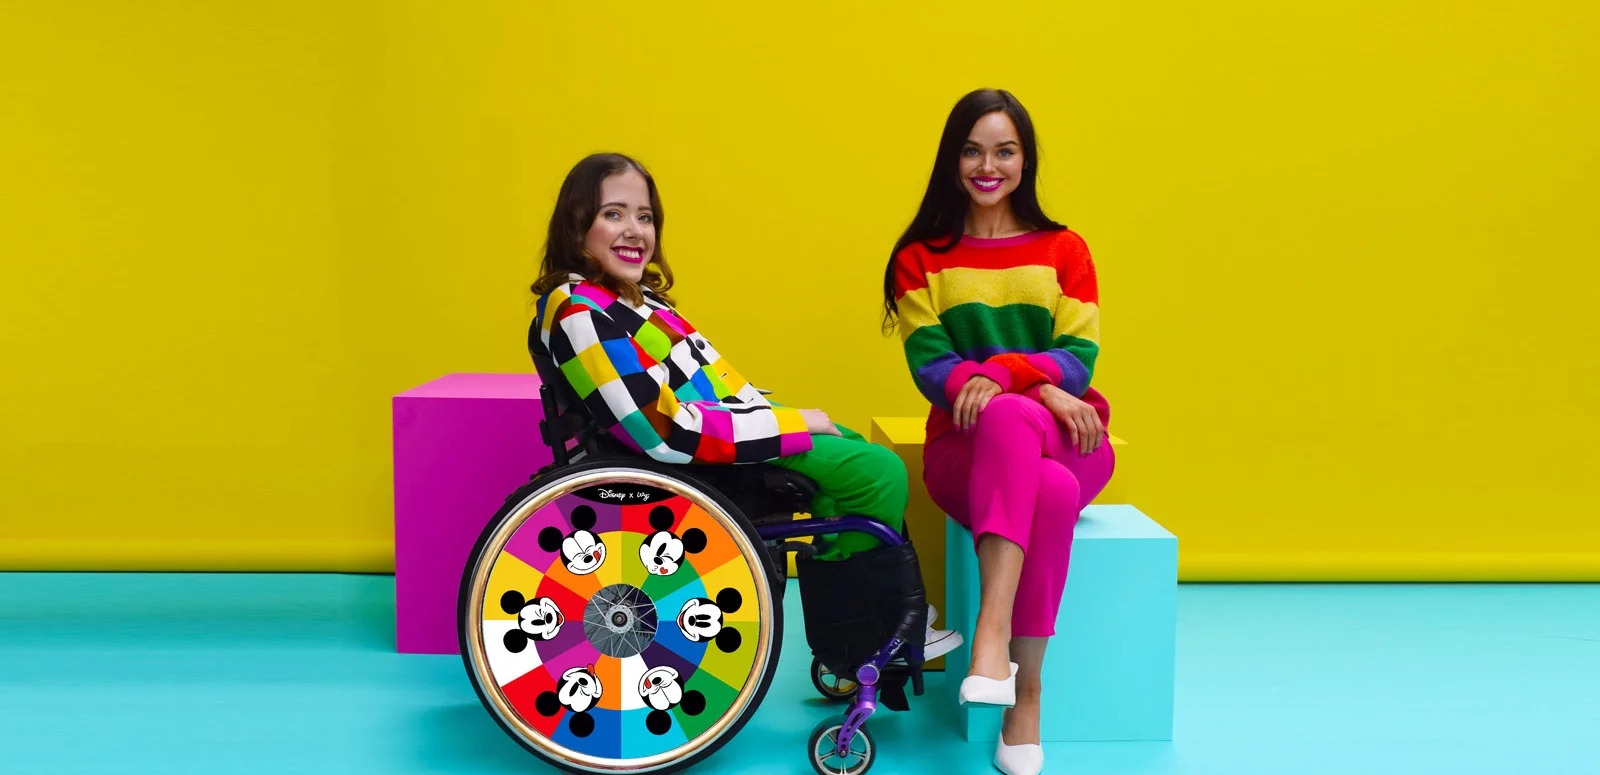 Two women, one in a wheelchair, models their disability-inclusive clothing and decorated wheels. The wheelchair model is wearing multi-coloured blazer and green pants, and her wheel has different Mickey Mouse facial expressions. The other woman is wearing a striped multicoloured sweater,  pink pants, and white shoes.